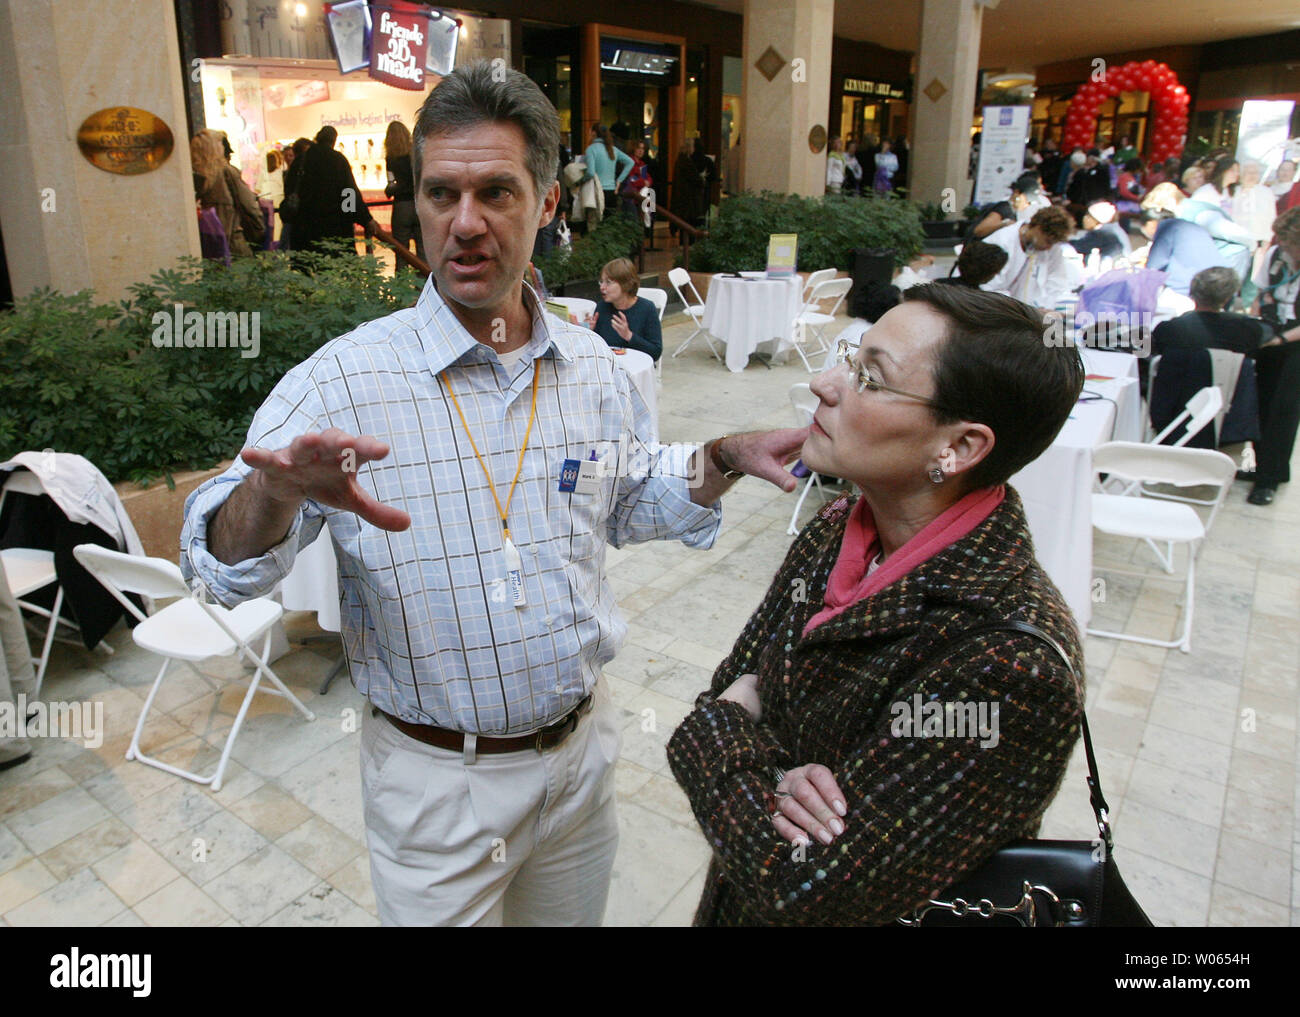 Mark Gorski, co- chair of the St. Louis chapter of the National Woman's Heart Day Health Fair, talks with board member Merle Freed during the annual event that brought out nearly three thousand women for screenings to the Saint Louis Galleria in Richmond Heights, Mo on February 17, 2006. Gorski was a 1984 Olympic games gold medalist in Los Angeles in the 1,000-meter match sprint for cycling. He is the first American to win a medal in this event. He was also a member of the U.S. Olympic Team in 1980 and 1984 and served as an alternate in 1988. (UPI Photo/Bill Greenblatt) Stock Photo